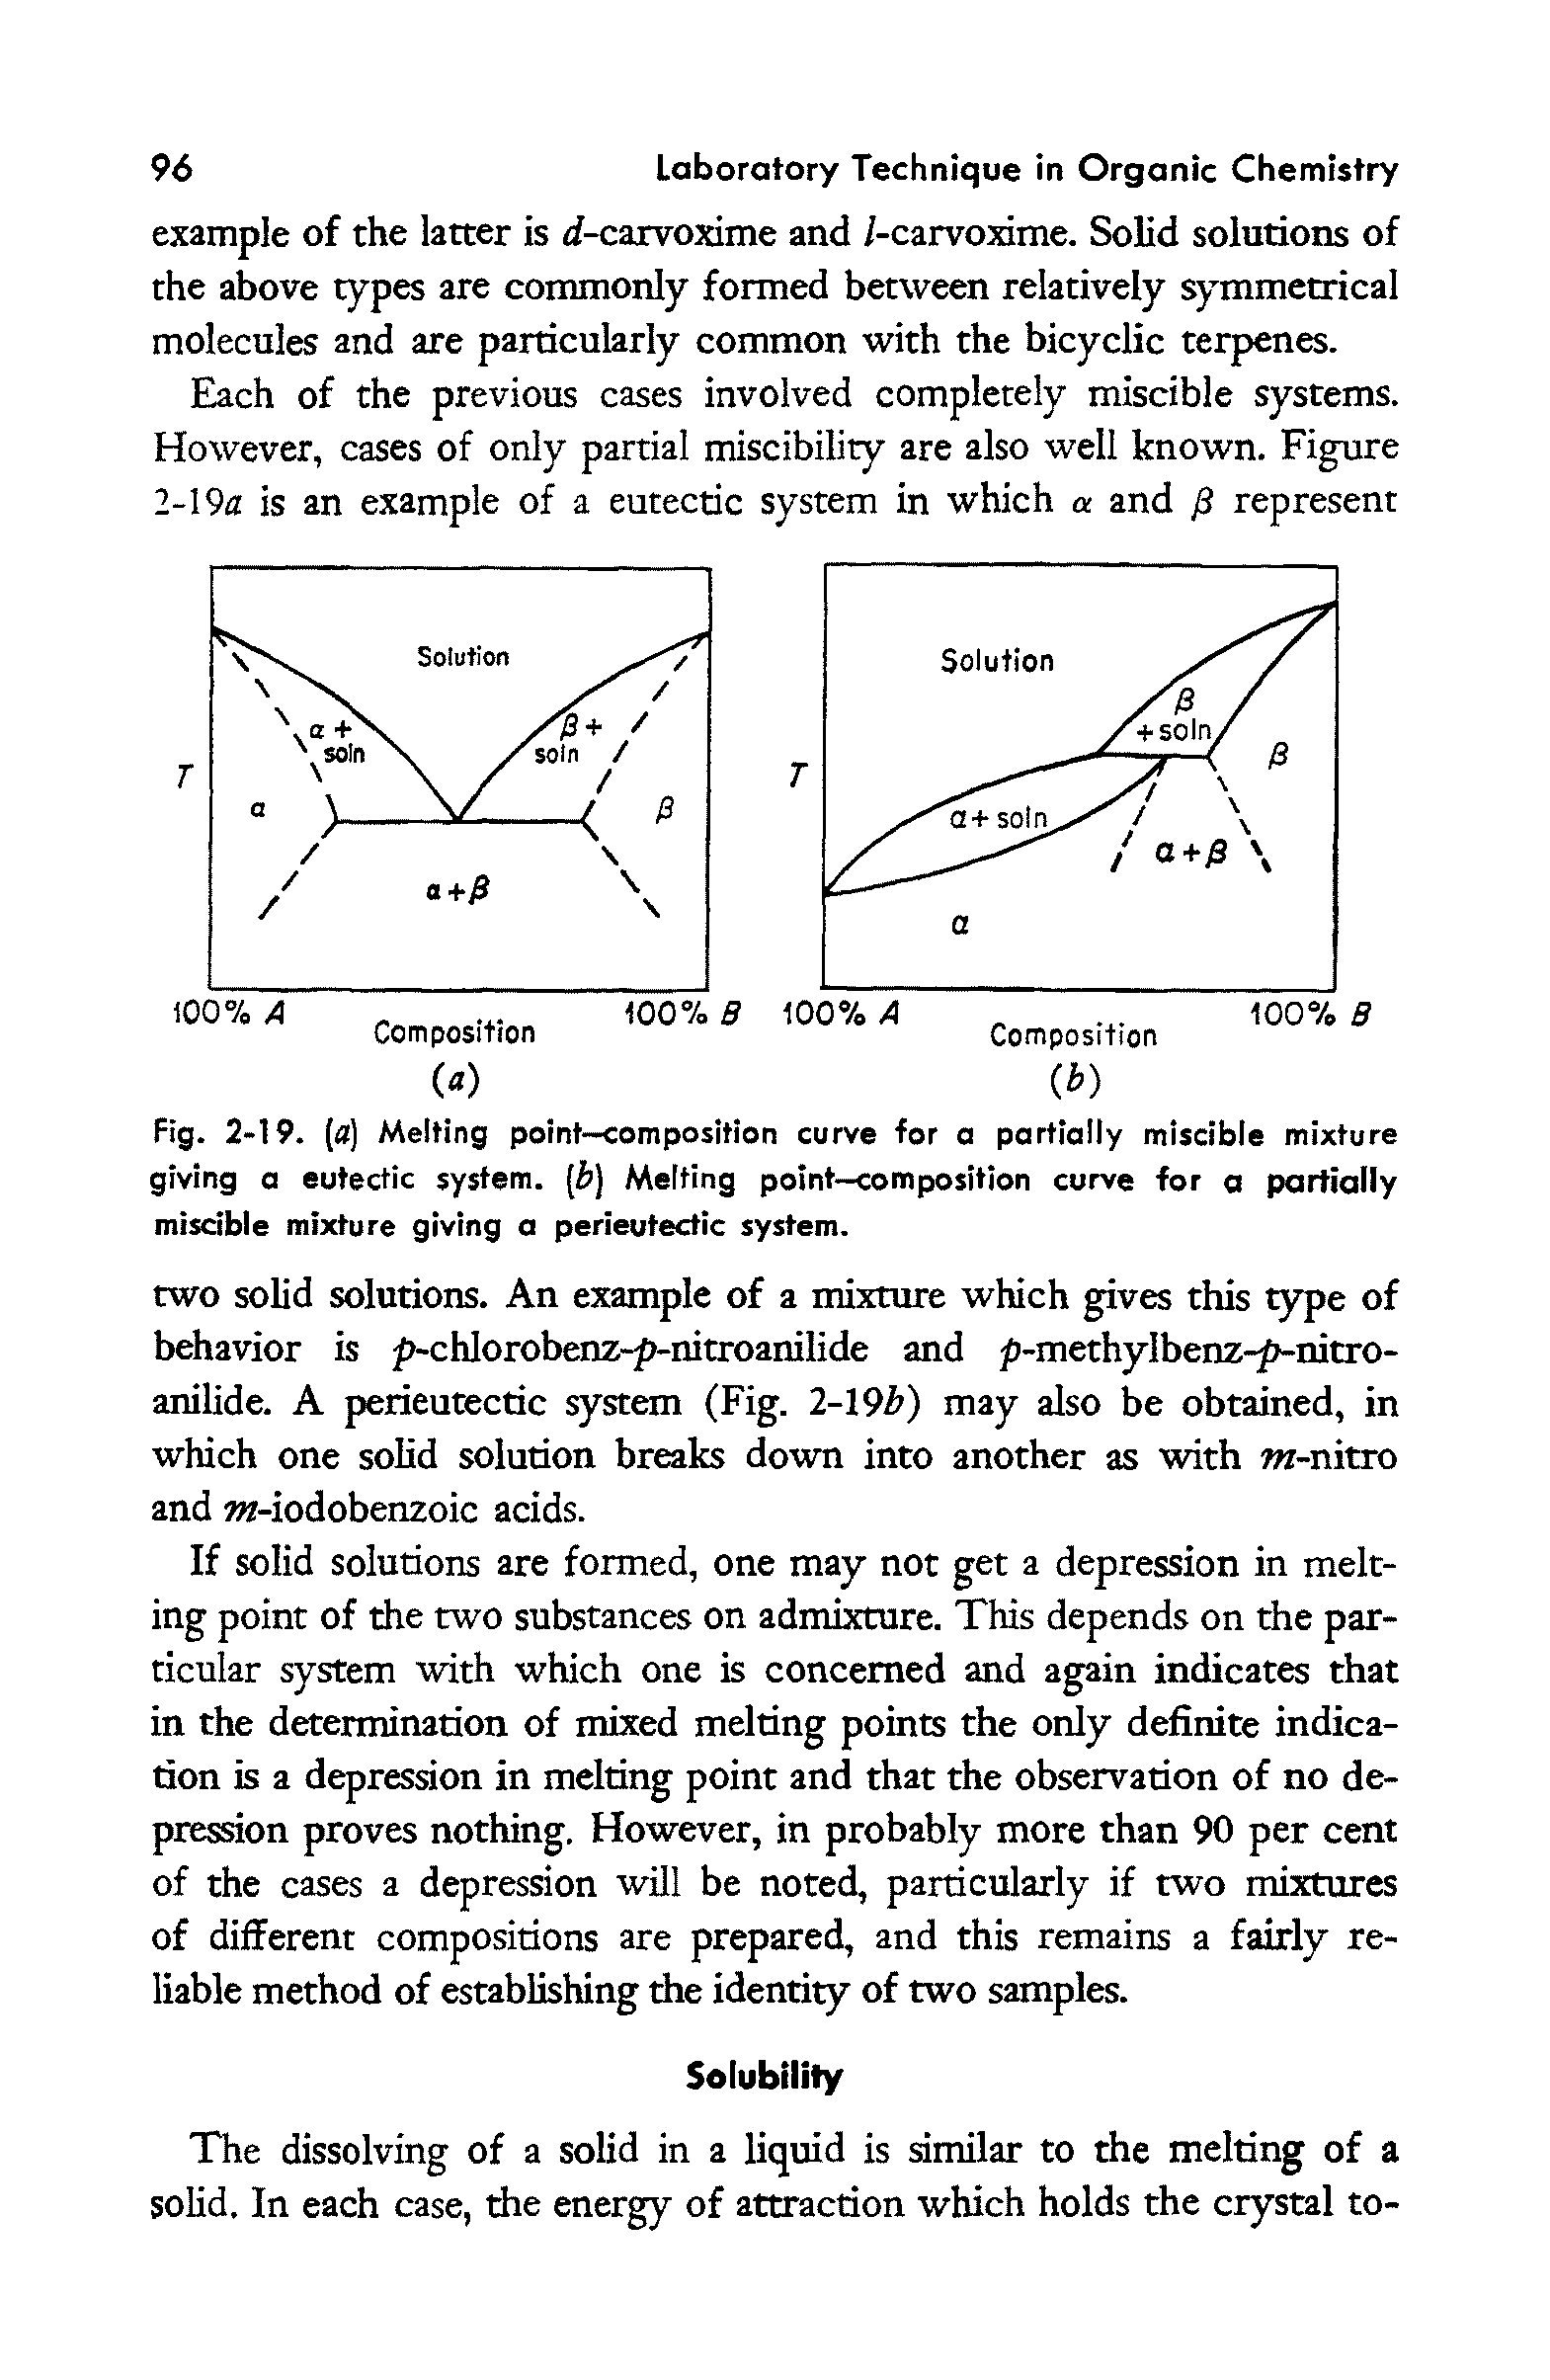 Fig. 2-19. ( ) Melting point-composition curve tor a portioliy miscibie mixture giving a eutectic system, [b] Melting point—composition curve for a partially miscible mixture giving a perieutectic system.